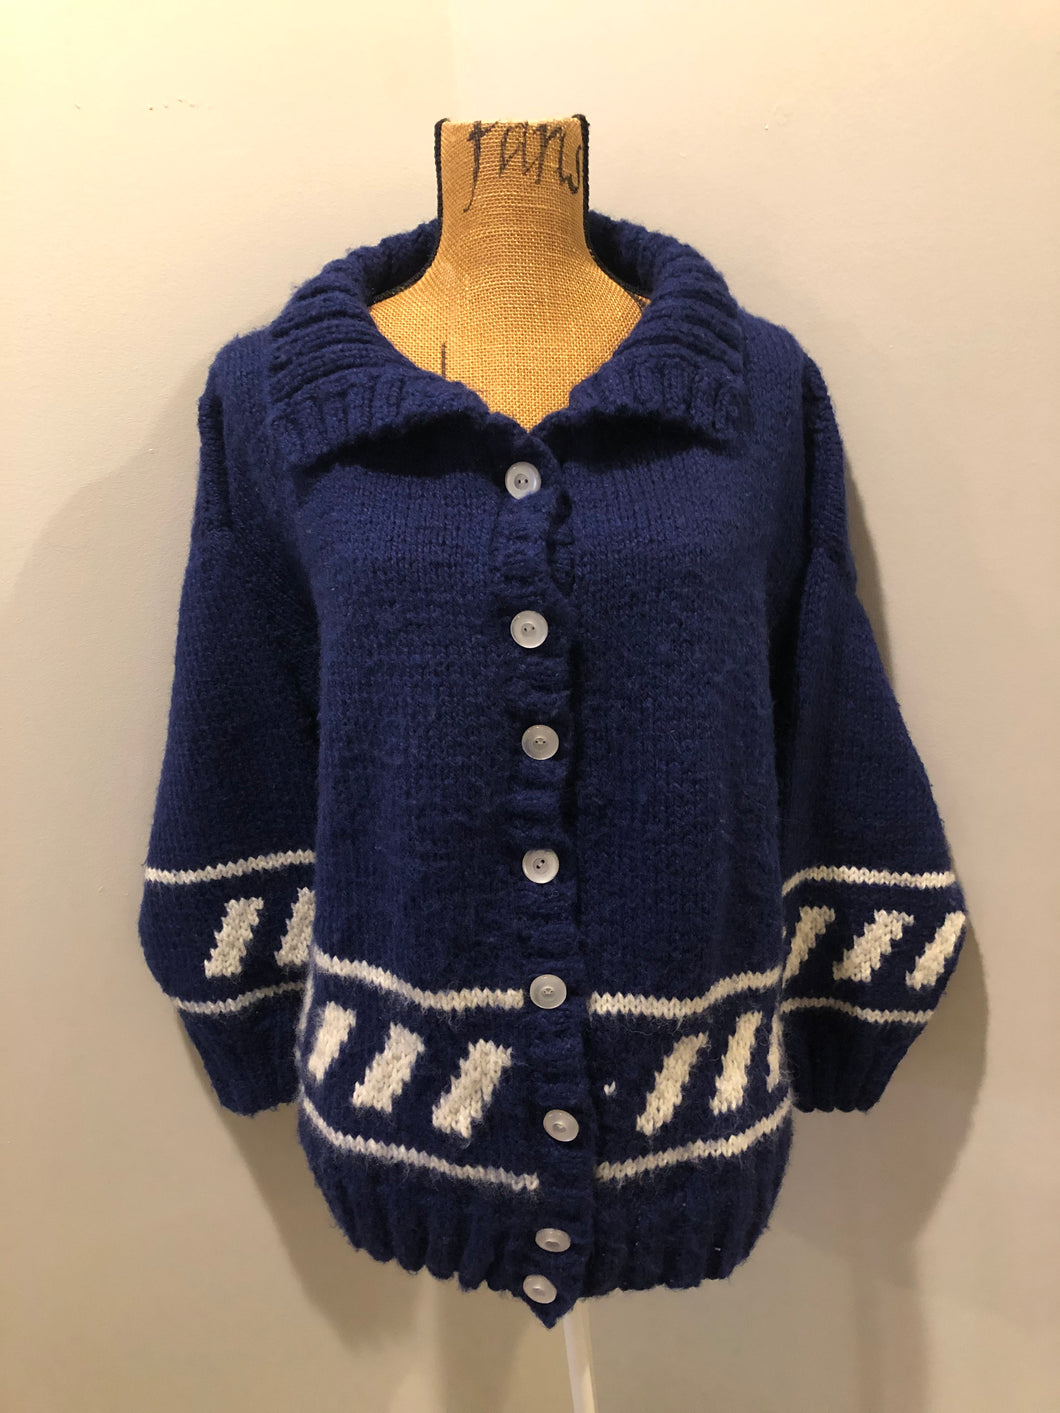 Kingspier Vintage - Hand knit royal blue cardigan with white design, collar and button closures. Made in Nova Scotia, Canada. Size large.
